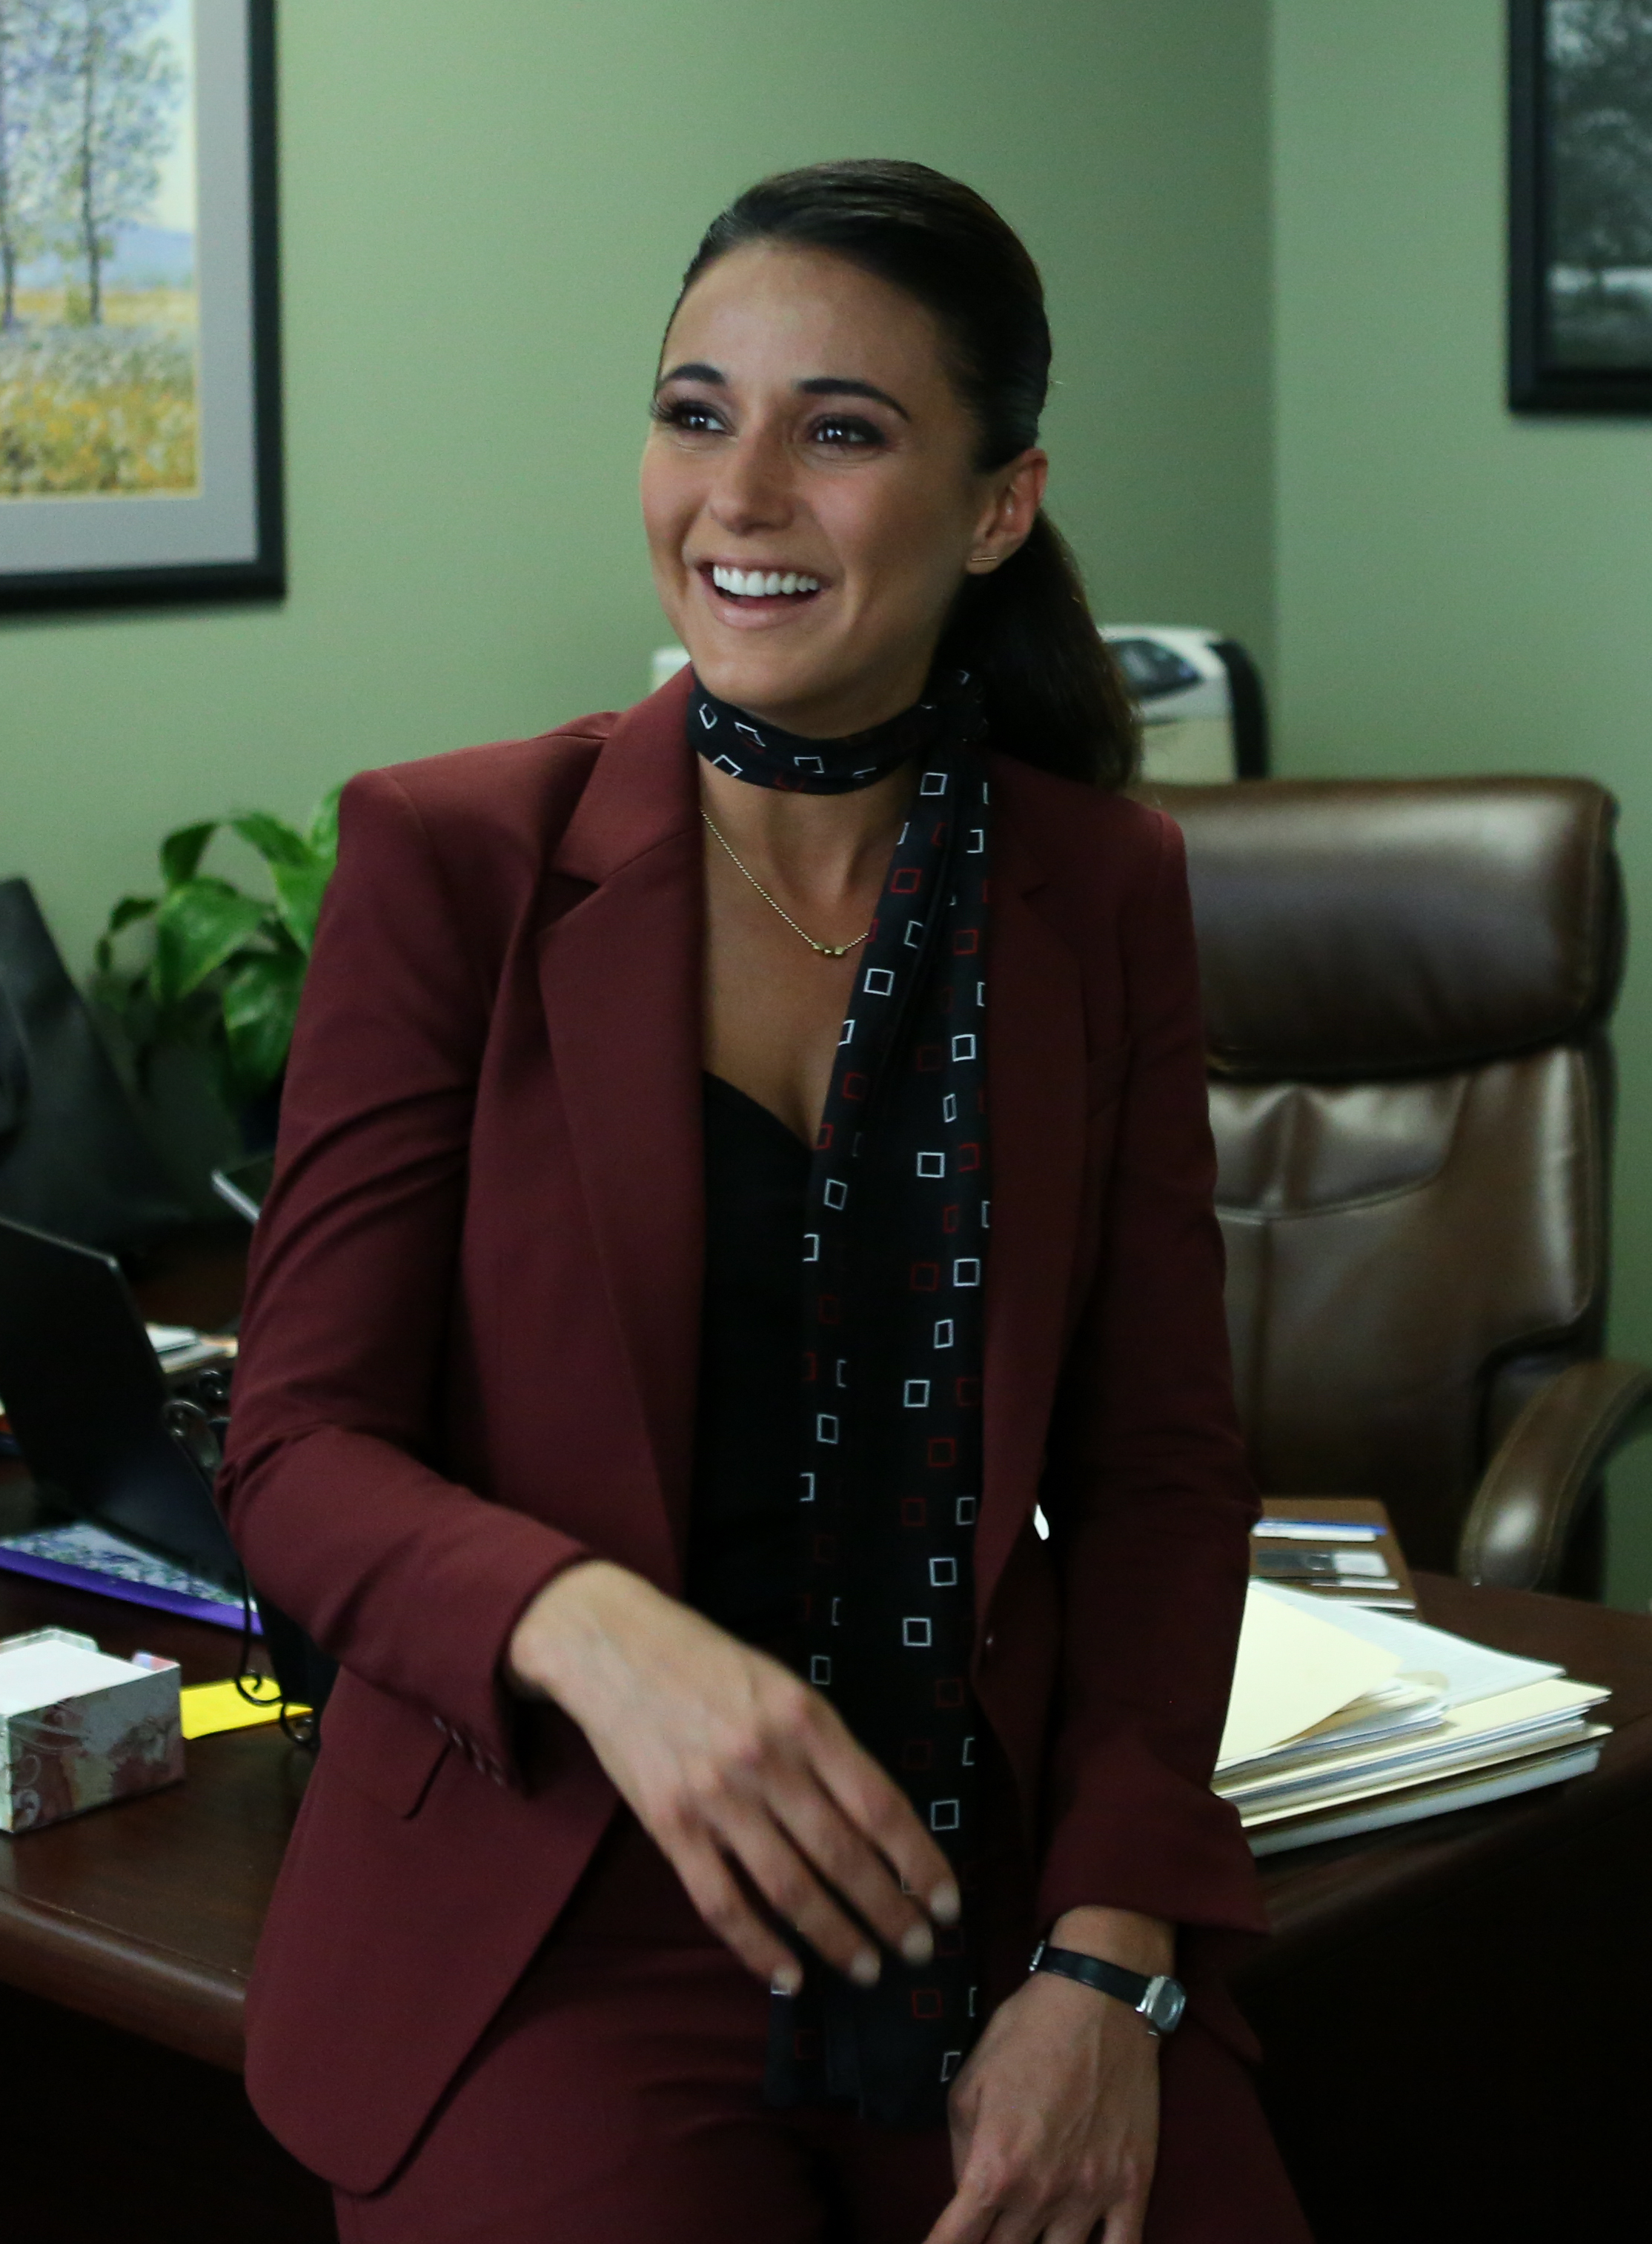 Emmanuelle Chriqui Comedy With A French Twist